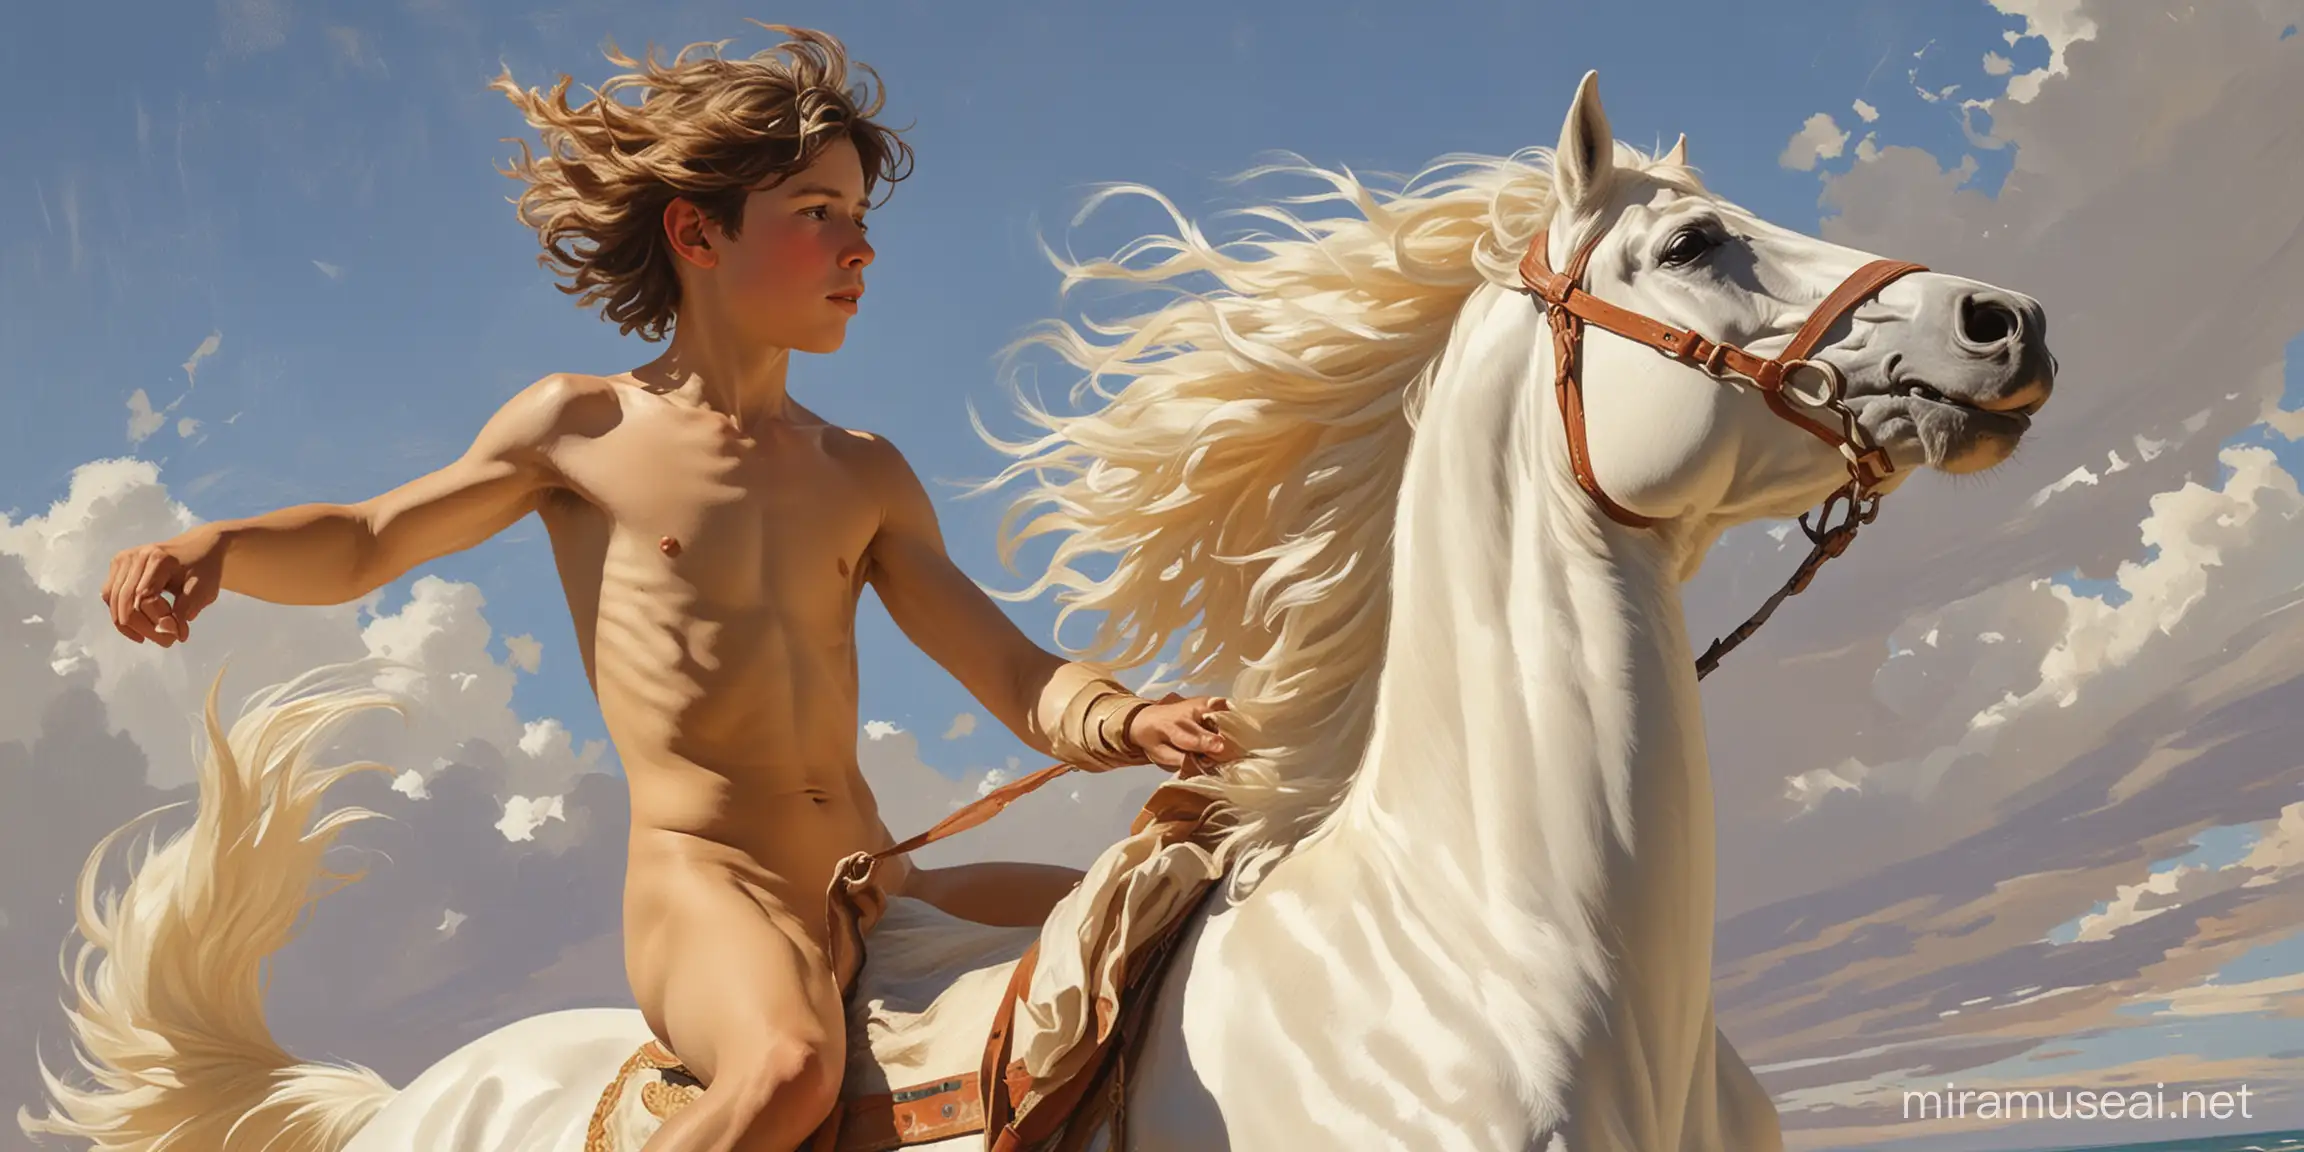 Epic Sorolla Style Painting Nude Boy Riding White Horse with Backlighting